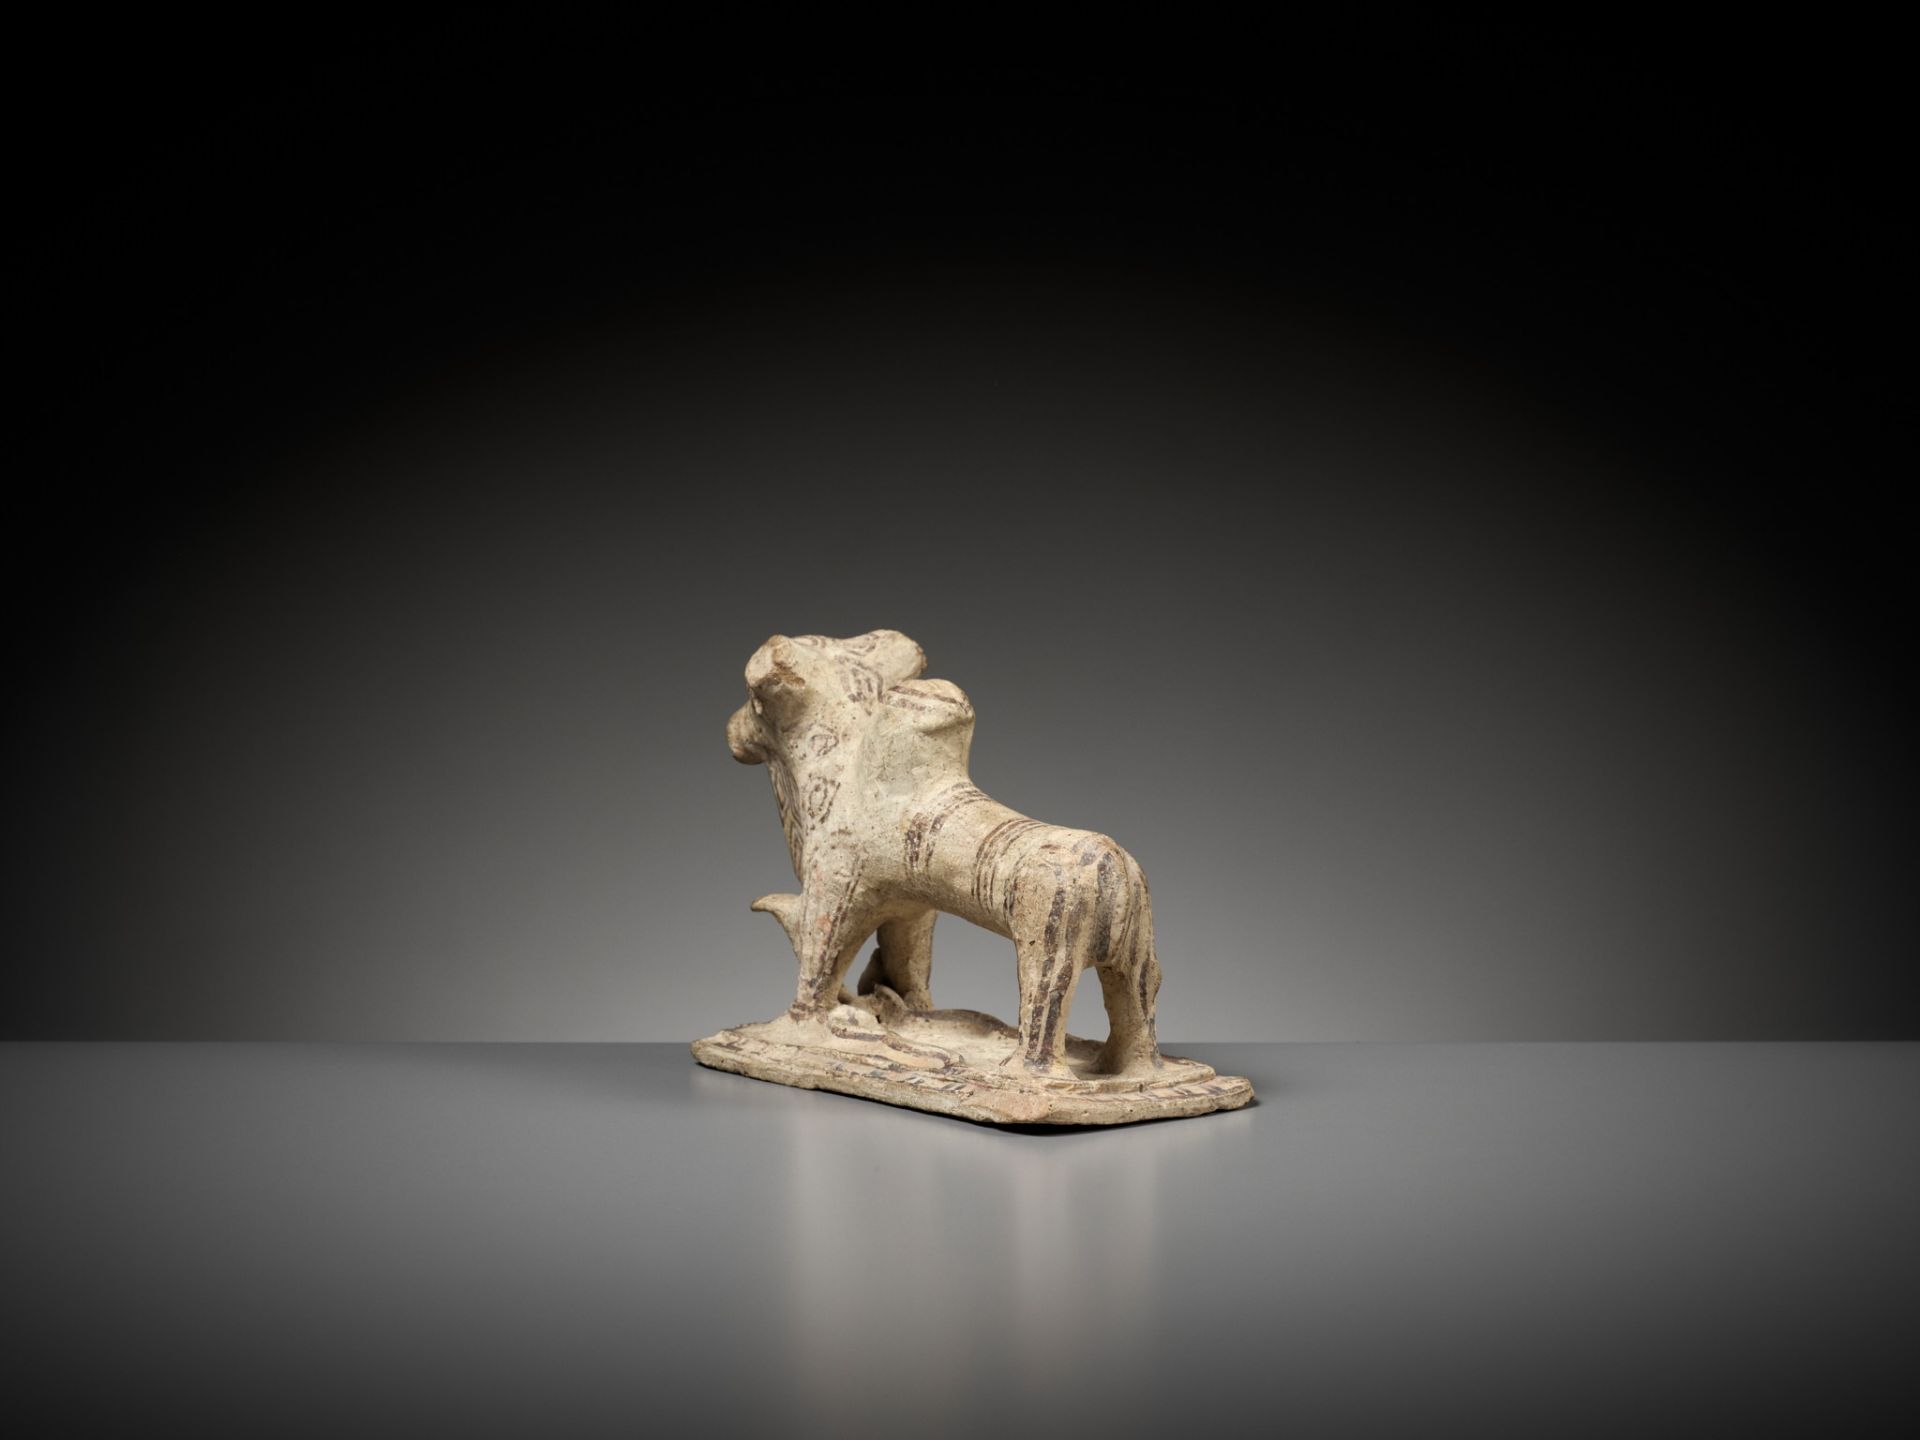 A PAINTED TERRACOTTA FIGURE OF A HUMPED OX, MOHENJO-DARO - Image 9 of 12